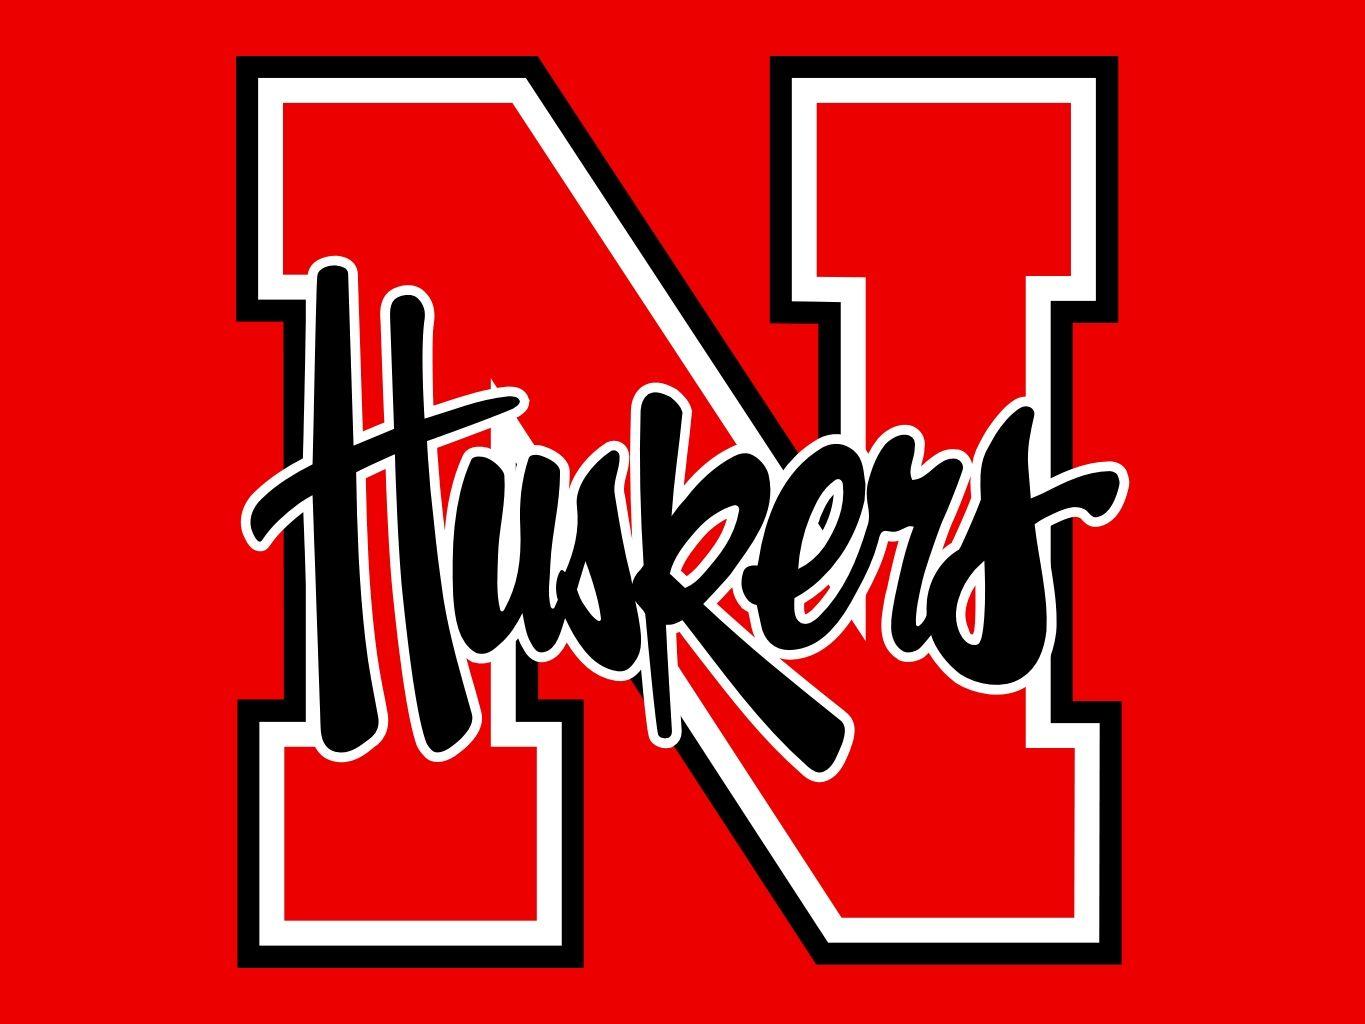 Huskers Logo - Free Huskers Clipart, Download Free Clip Art, Free Clip Art